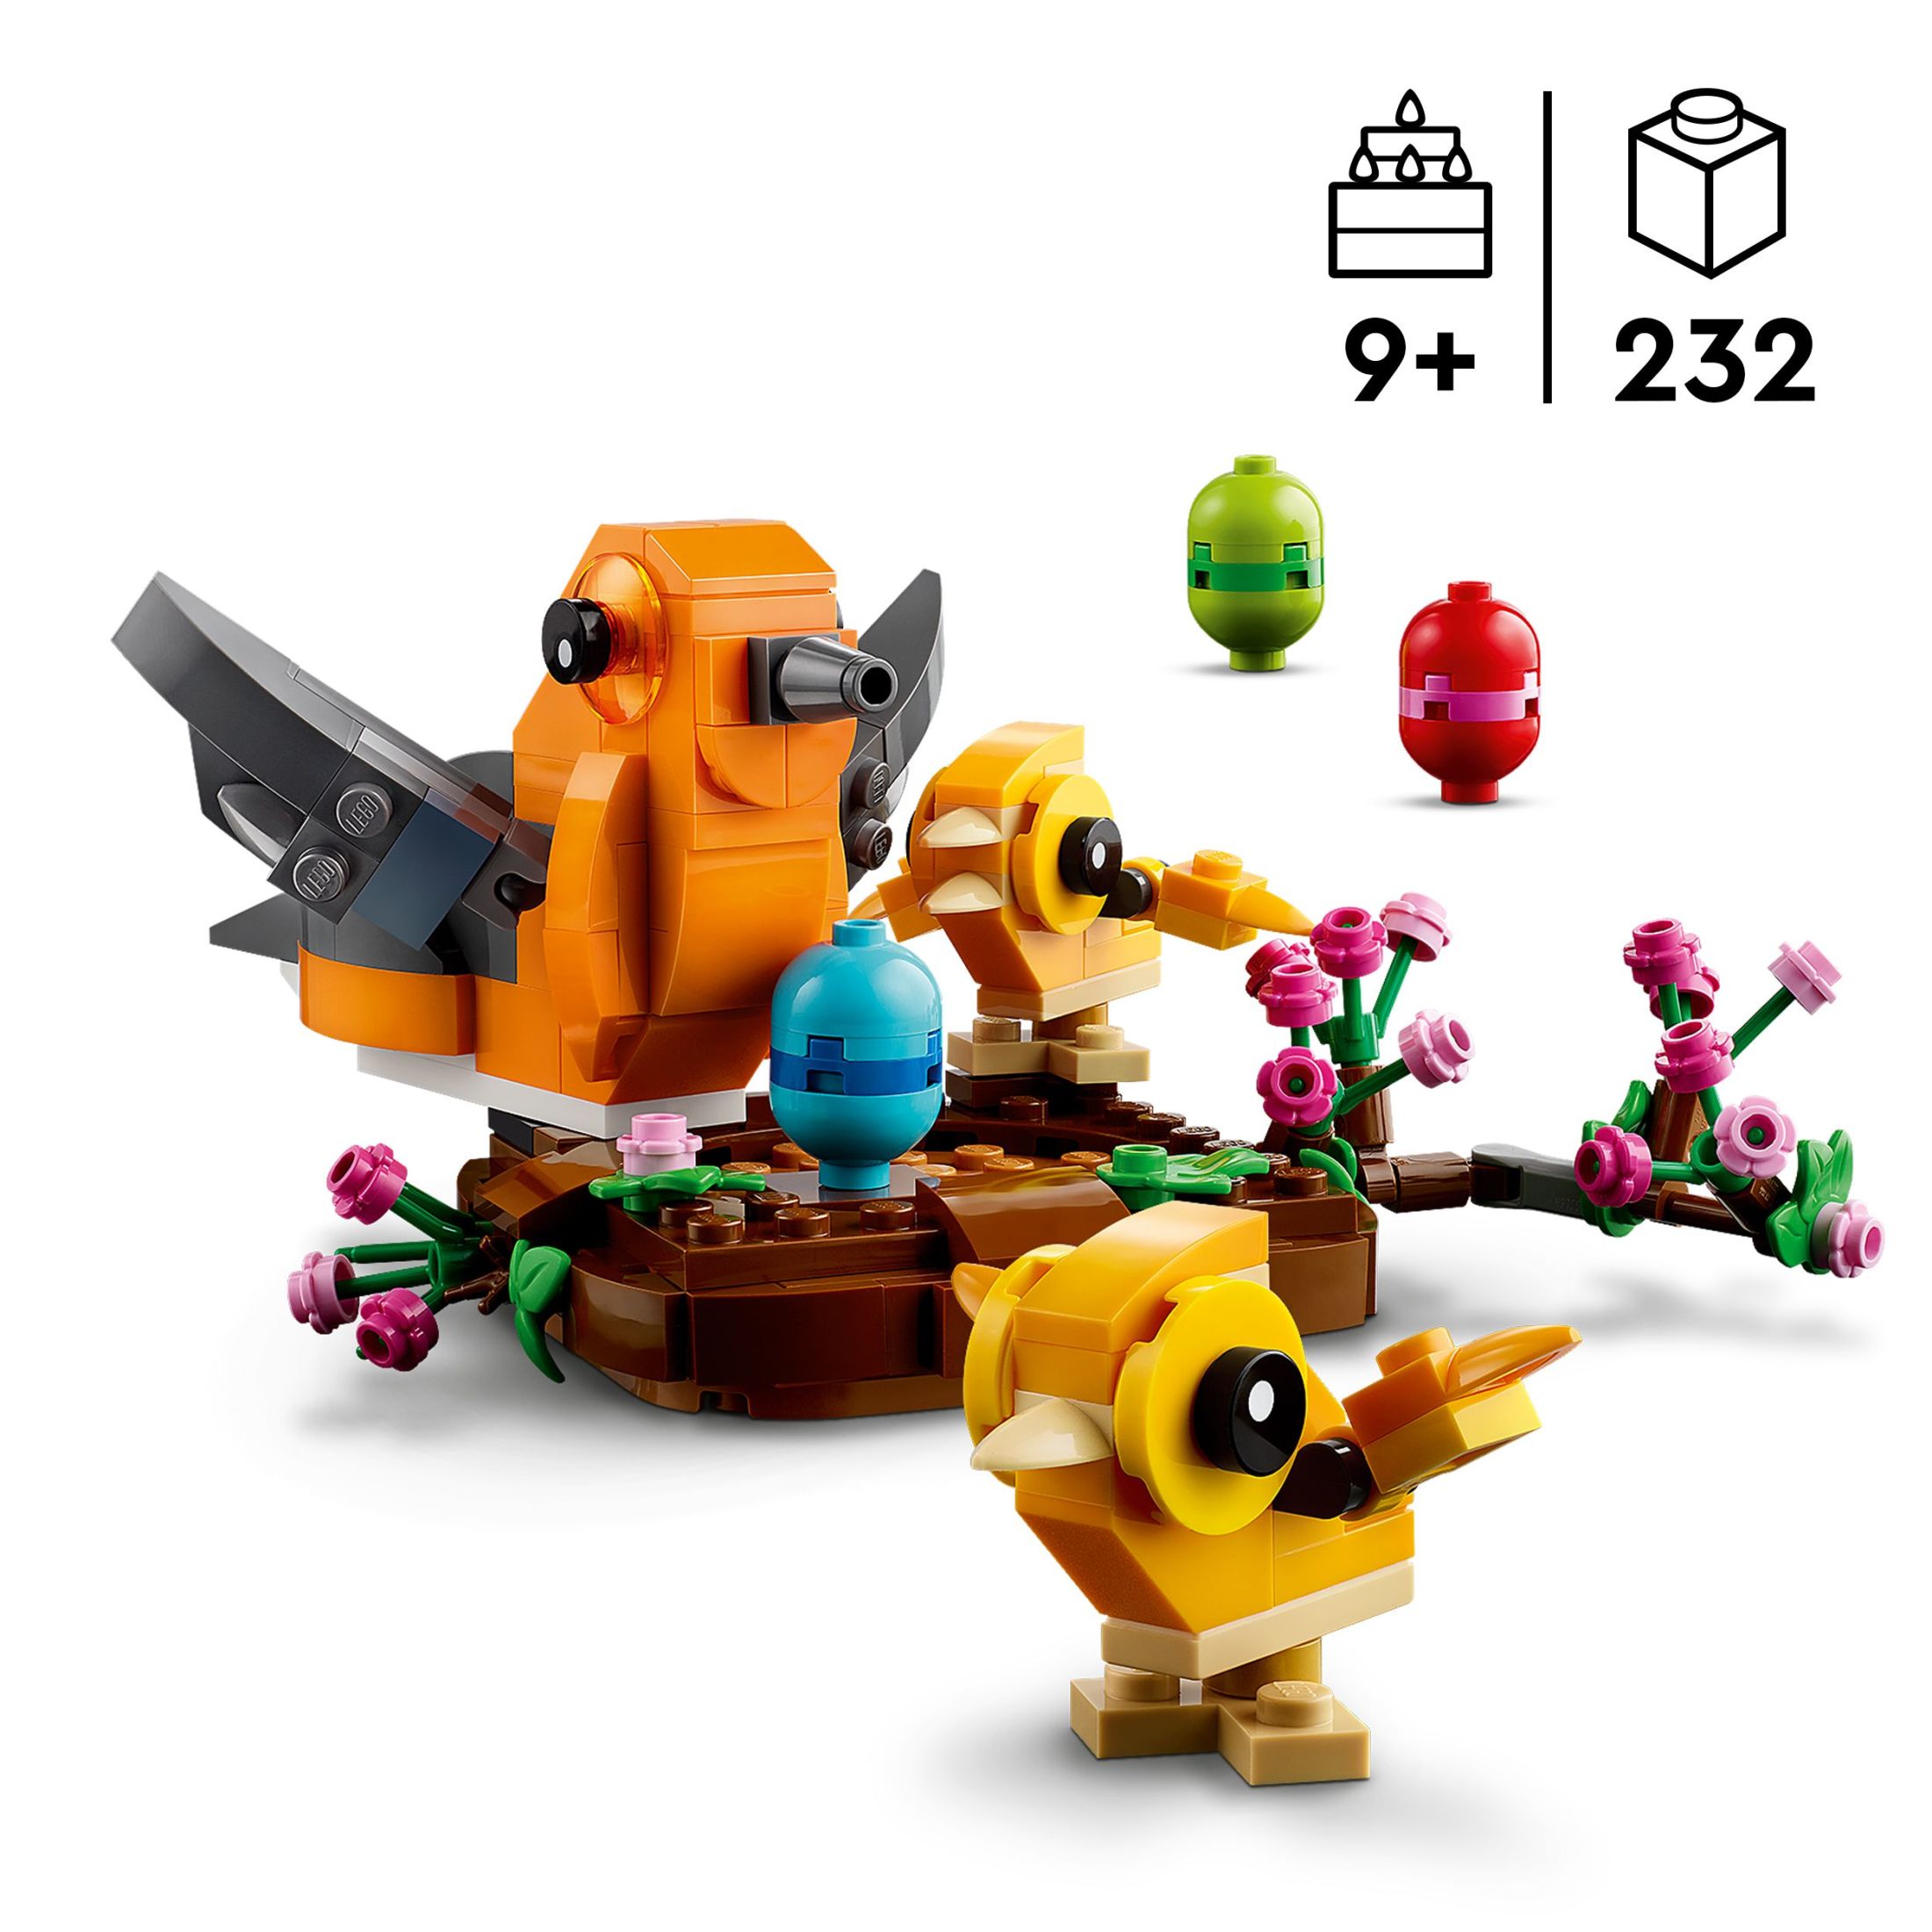 LEGO Bird’s Nest Building Toy Kit, Makes a Great Easter Basket Filler and Easter Gift Idea for Kids, 40639 - image 3 of 7